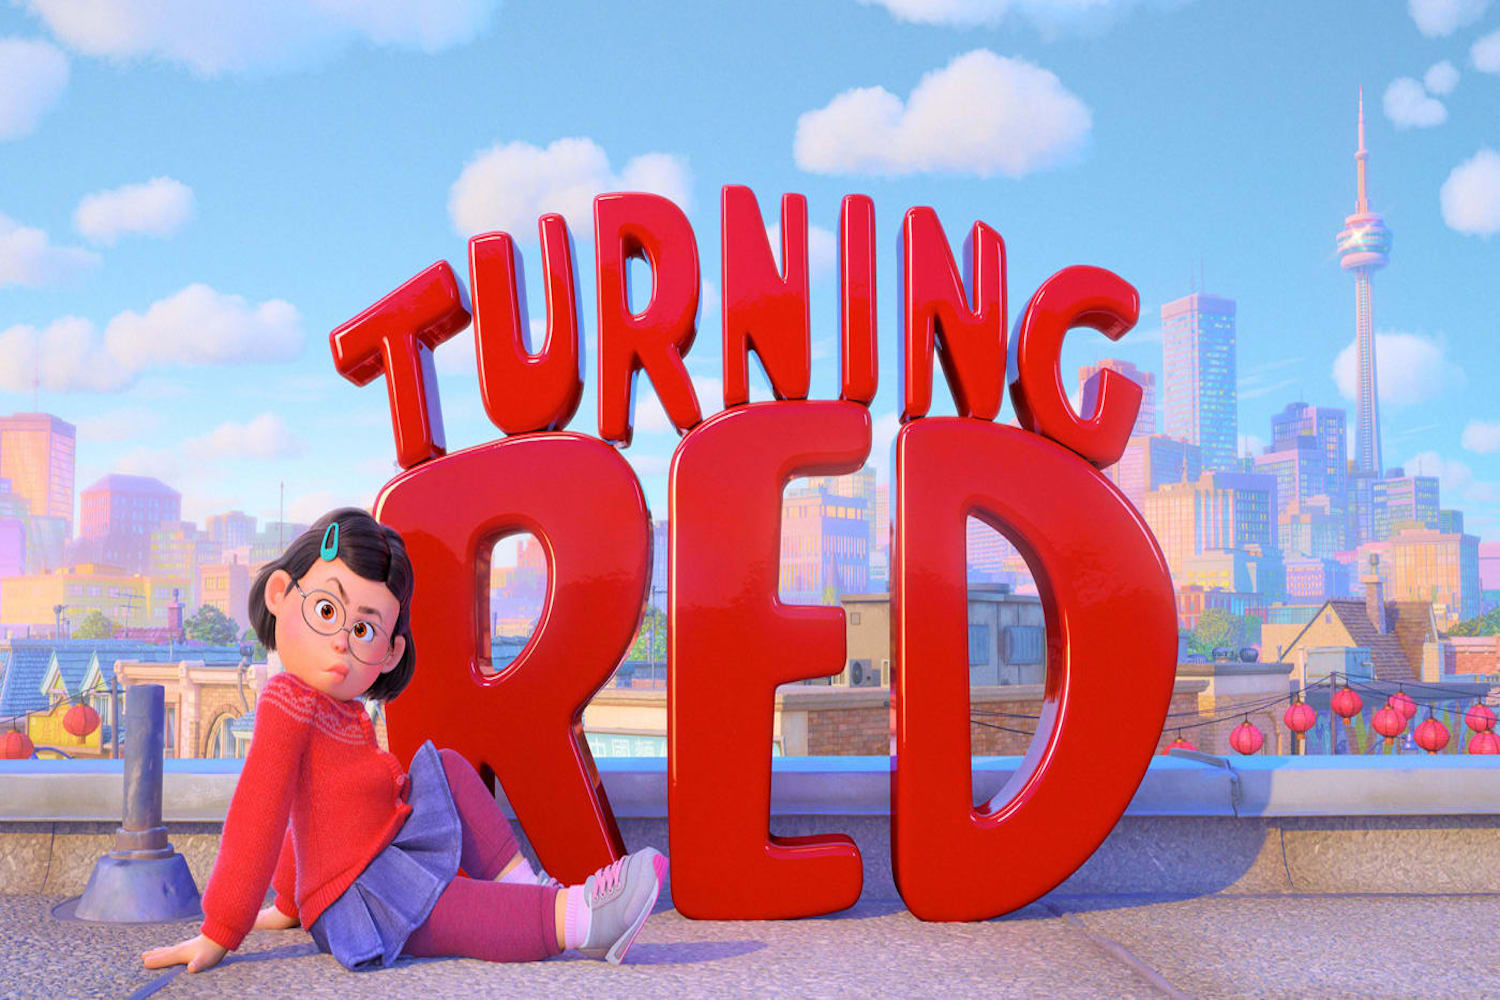 NEWS: A New 'Turning Red' Pixar Film Is Coming To Theaters in 2022!